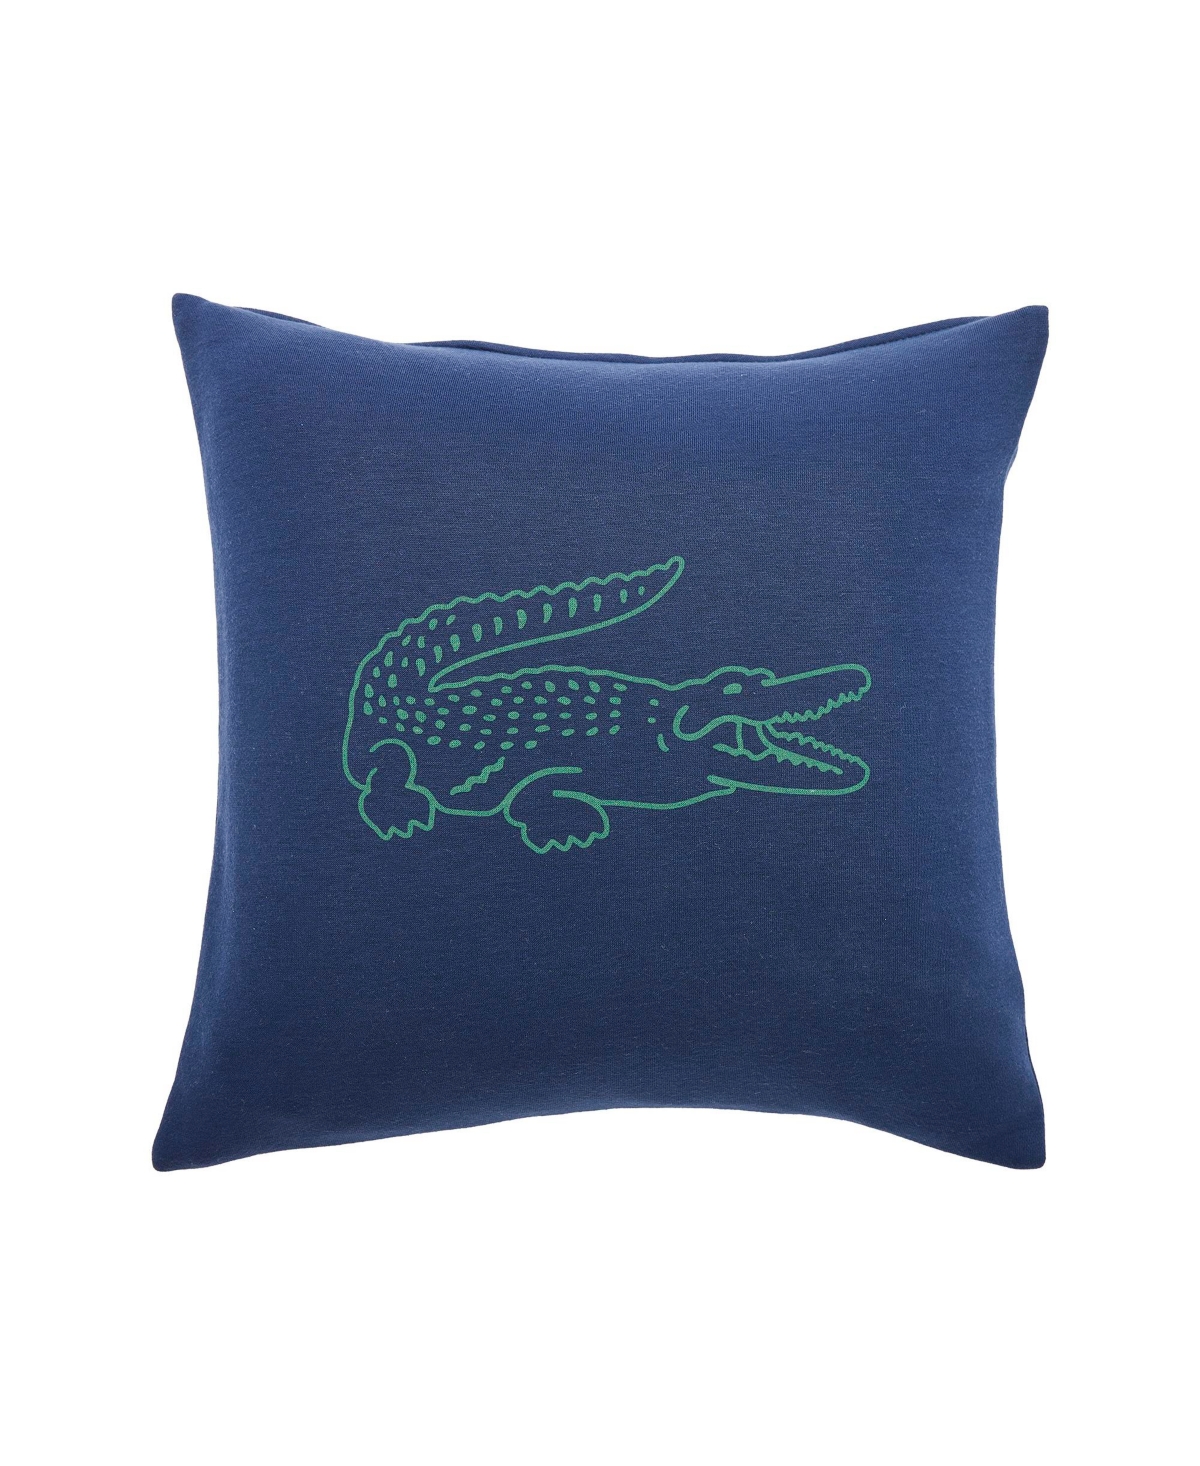 Lacoste Home Vintage-like Croc Decorative Pillow Bedding In Blue